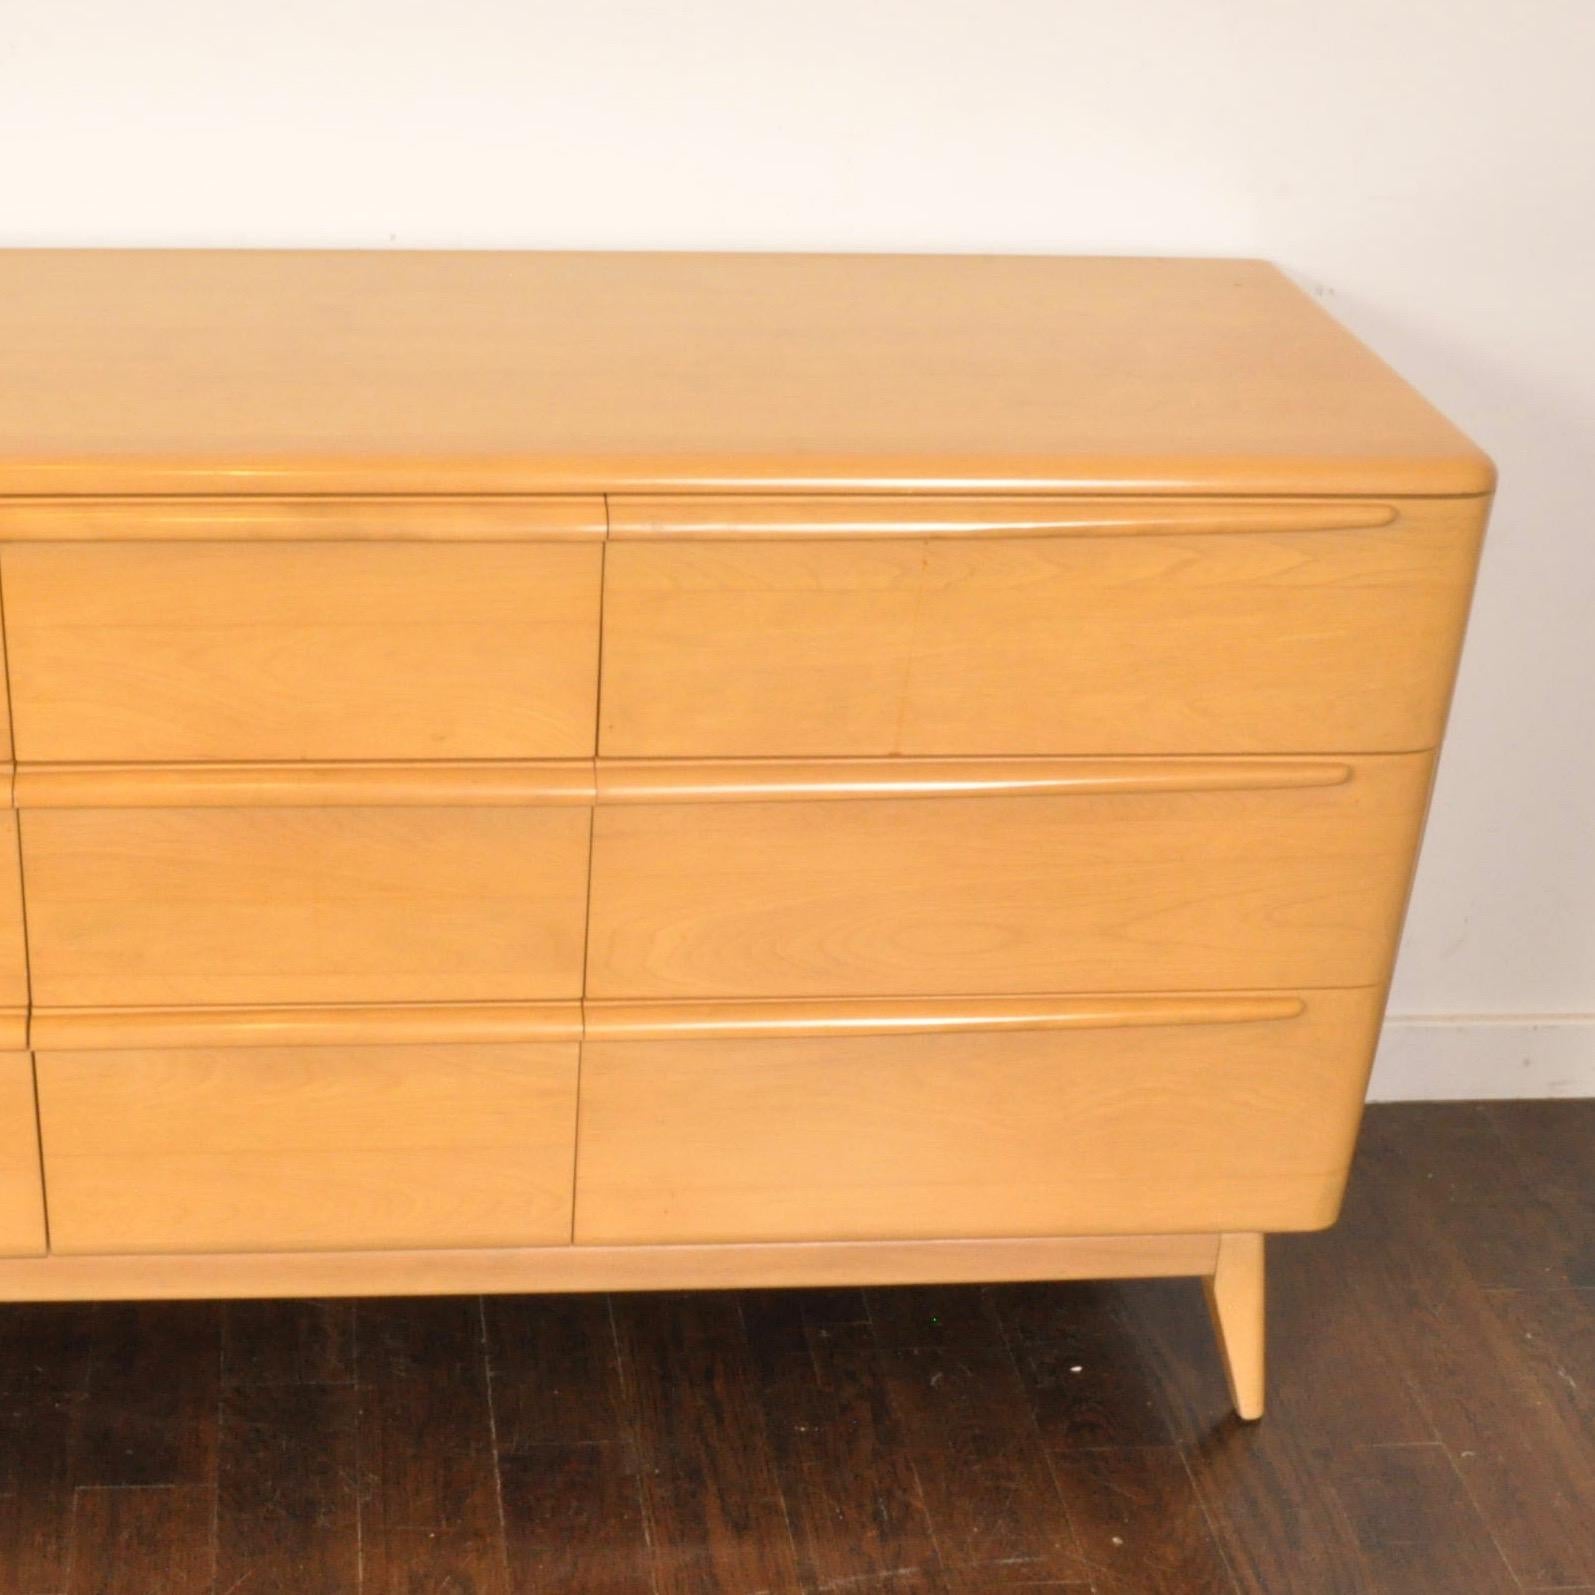 Classic Heywood Wakefield double dresser with mirror (not shown, but in perfect condition) in 